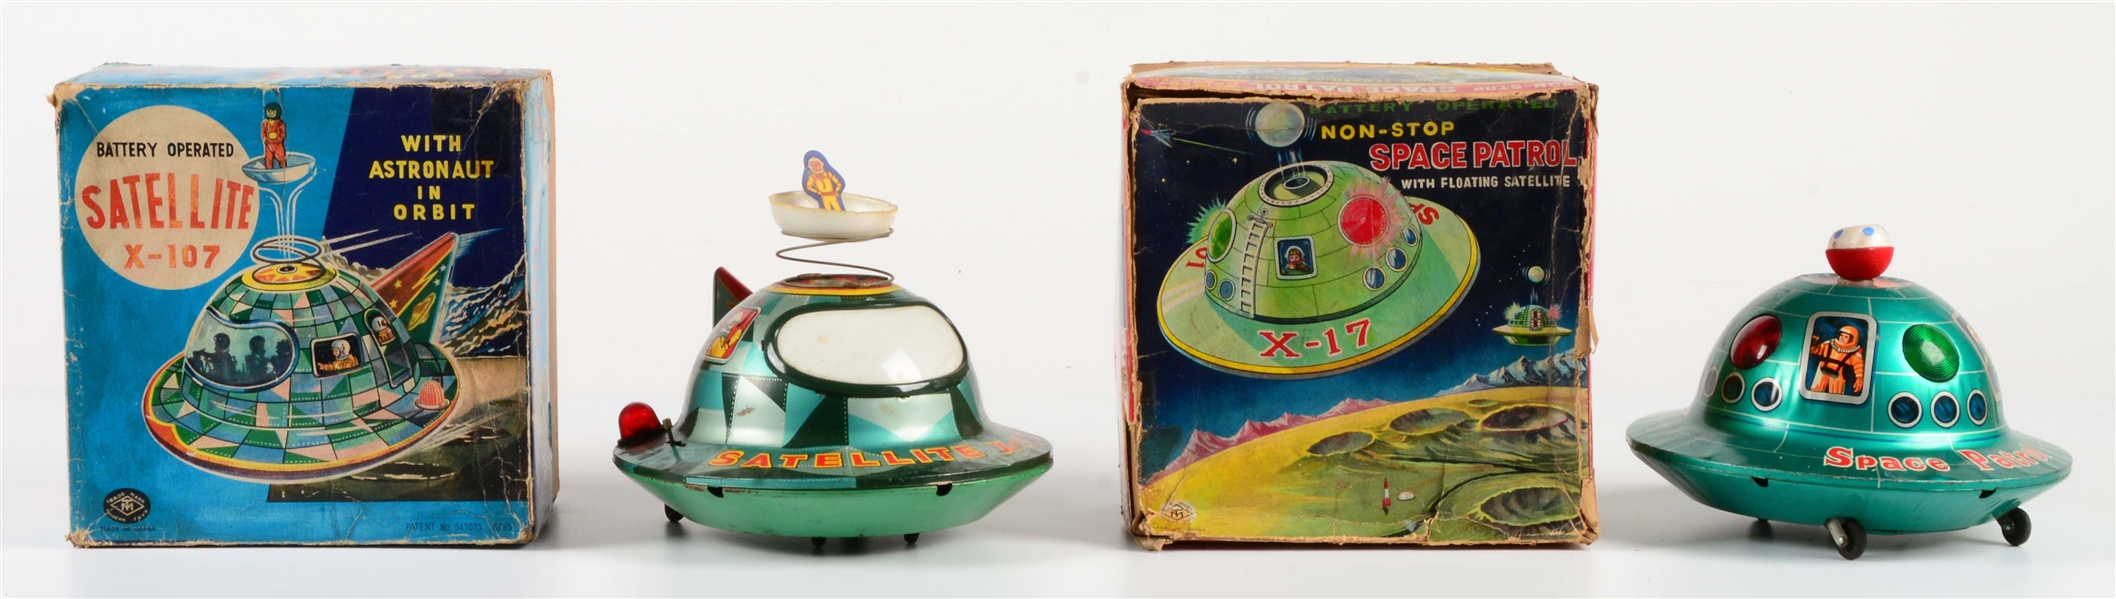 LOT OF 2: JAPANESE TIN LITHO BATTERY-OPERATED SATELLITE FLYING SAUCER TOYS.